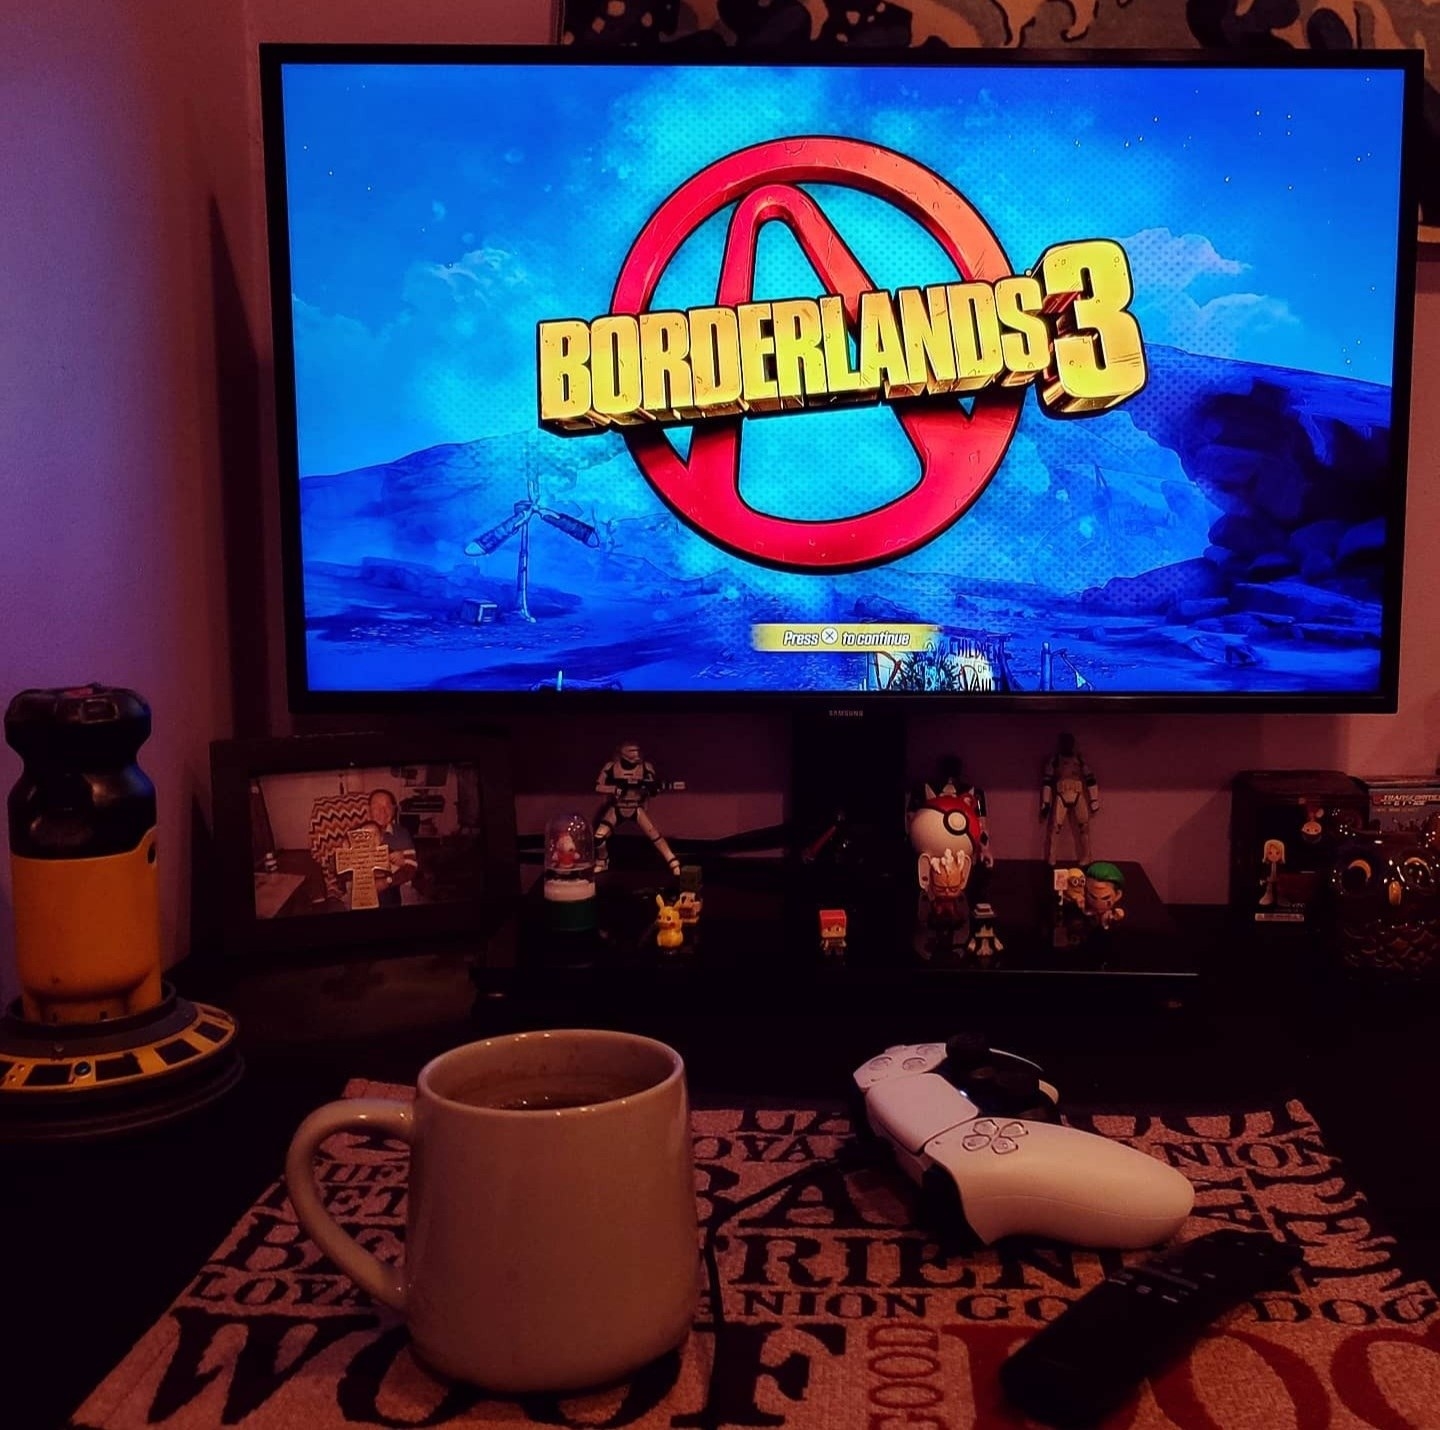 reviewer photo of the TV hooked up to a gaming set up, displaying the Borderlands 3 game loading screen